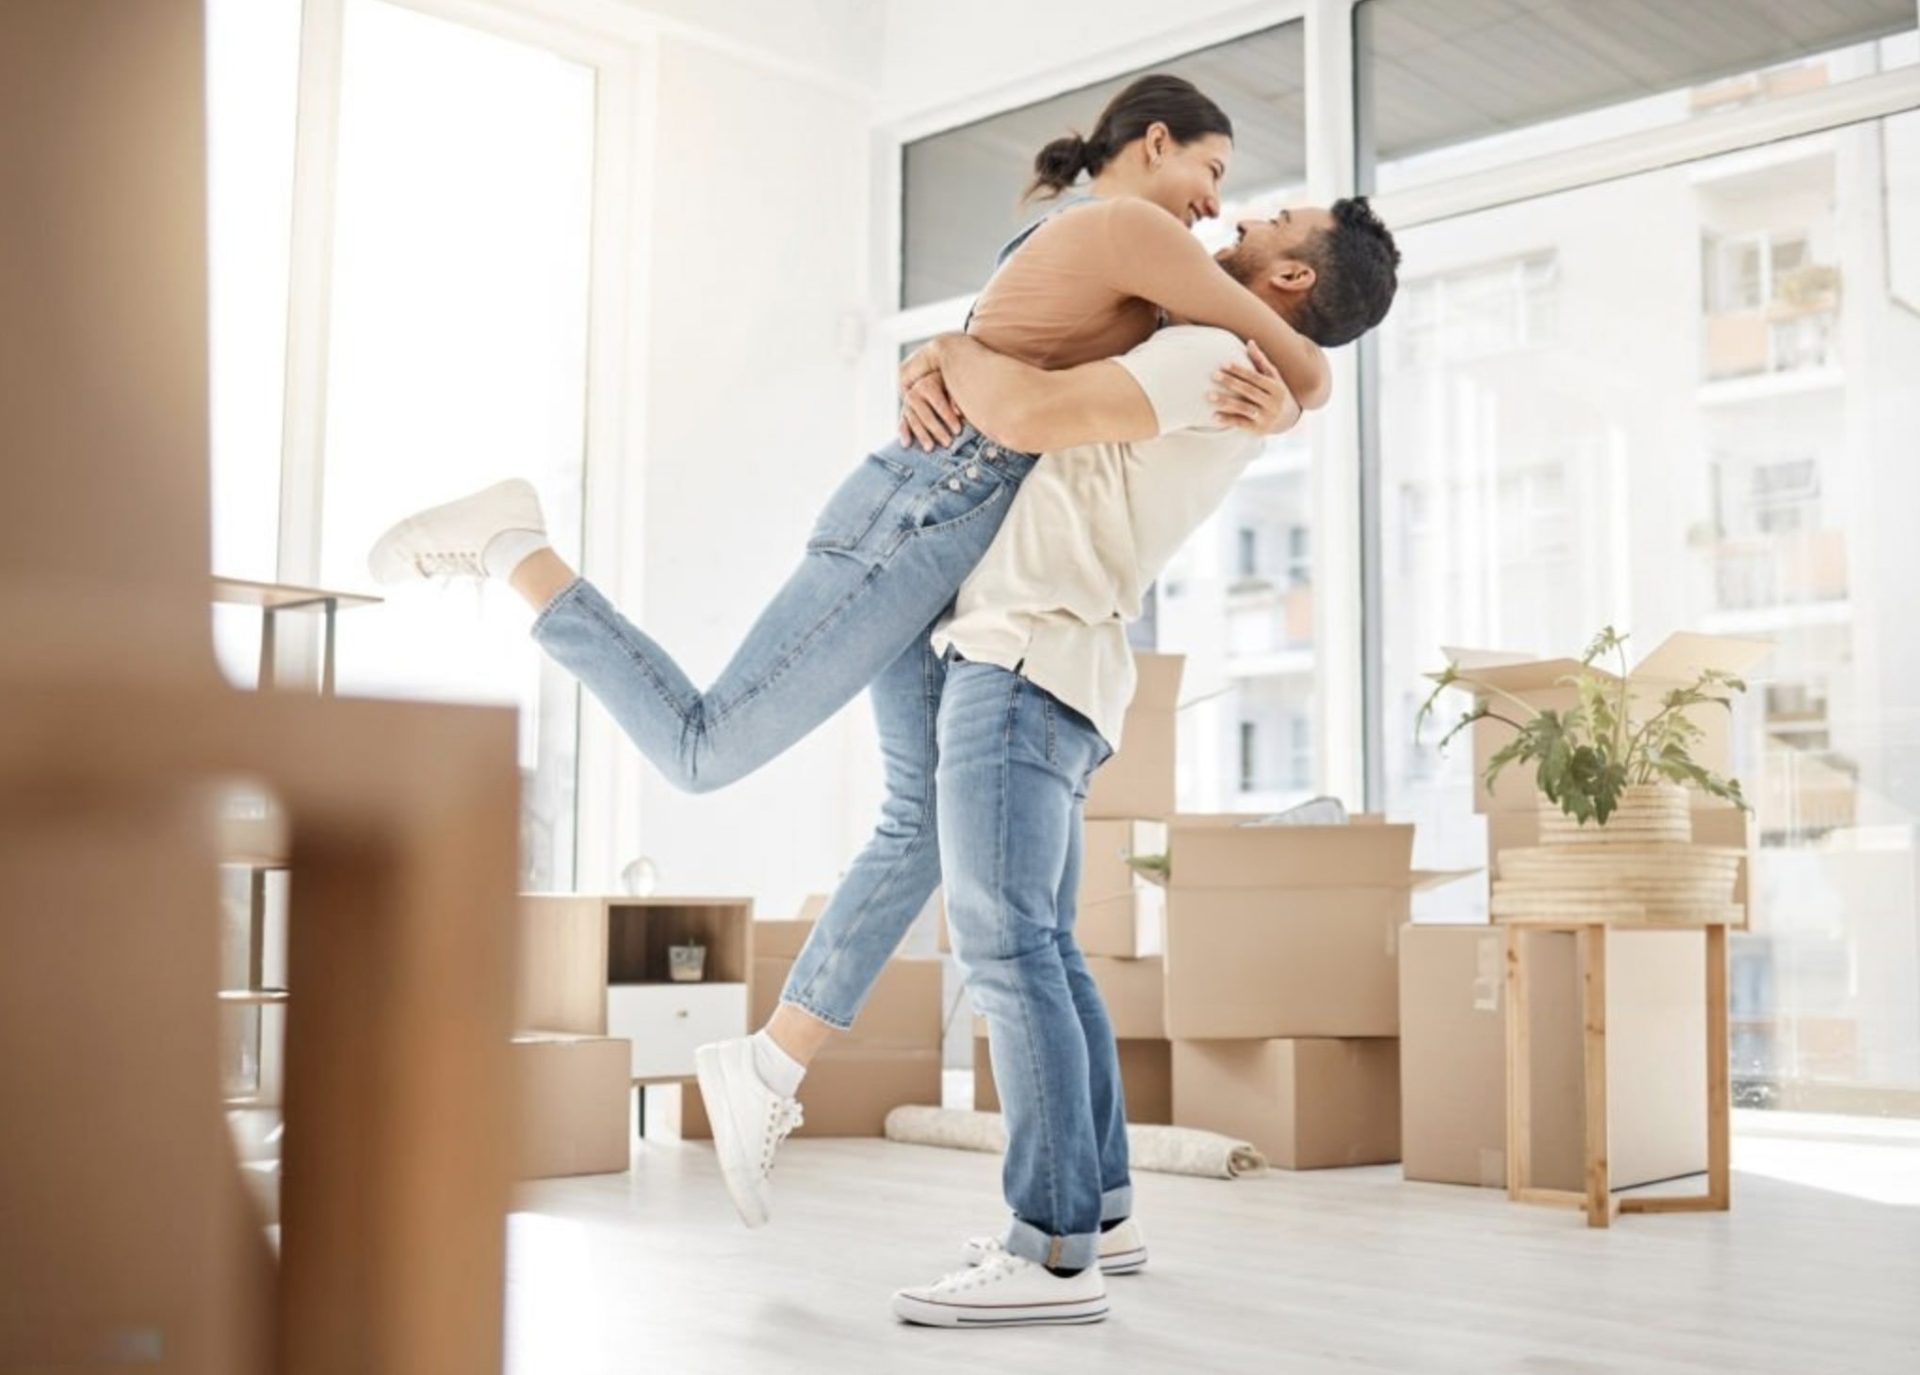 STEPS TO FIND THE HOME OF YOUR DREAMS